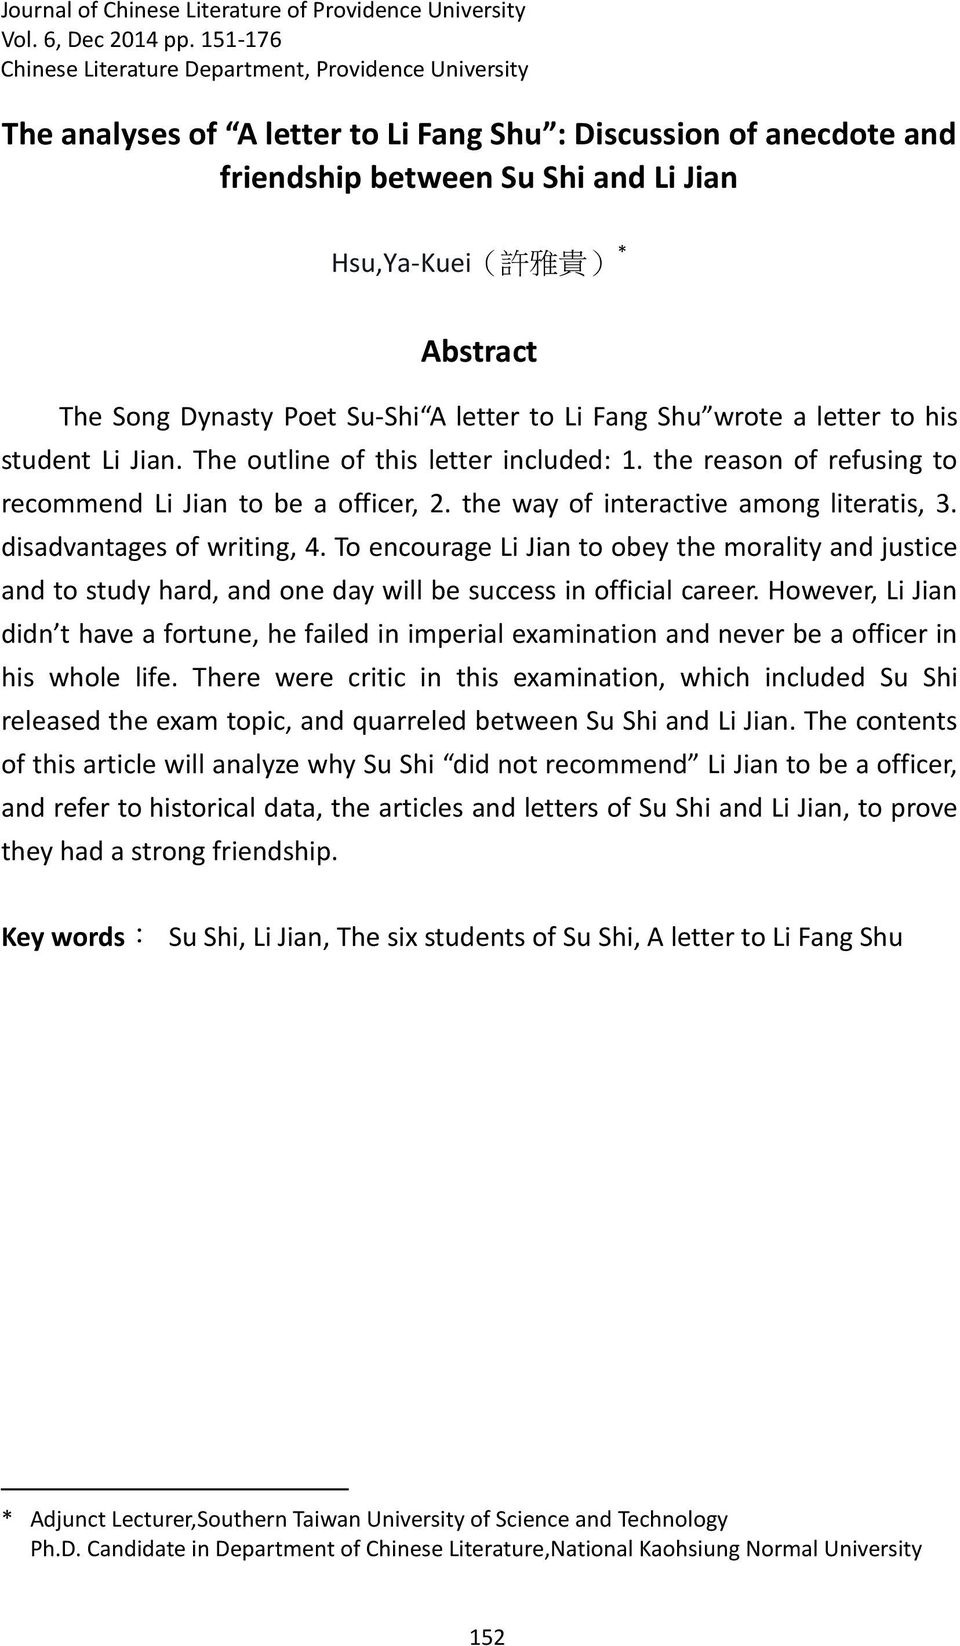 The Song Dynasty Poet Su-Shi A letter to Li Fang Shu wrote a letter to his student Li Jian. The outline of this letter included: 1. the reason of refusing to recommend Li Jian to be a officer, 2.